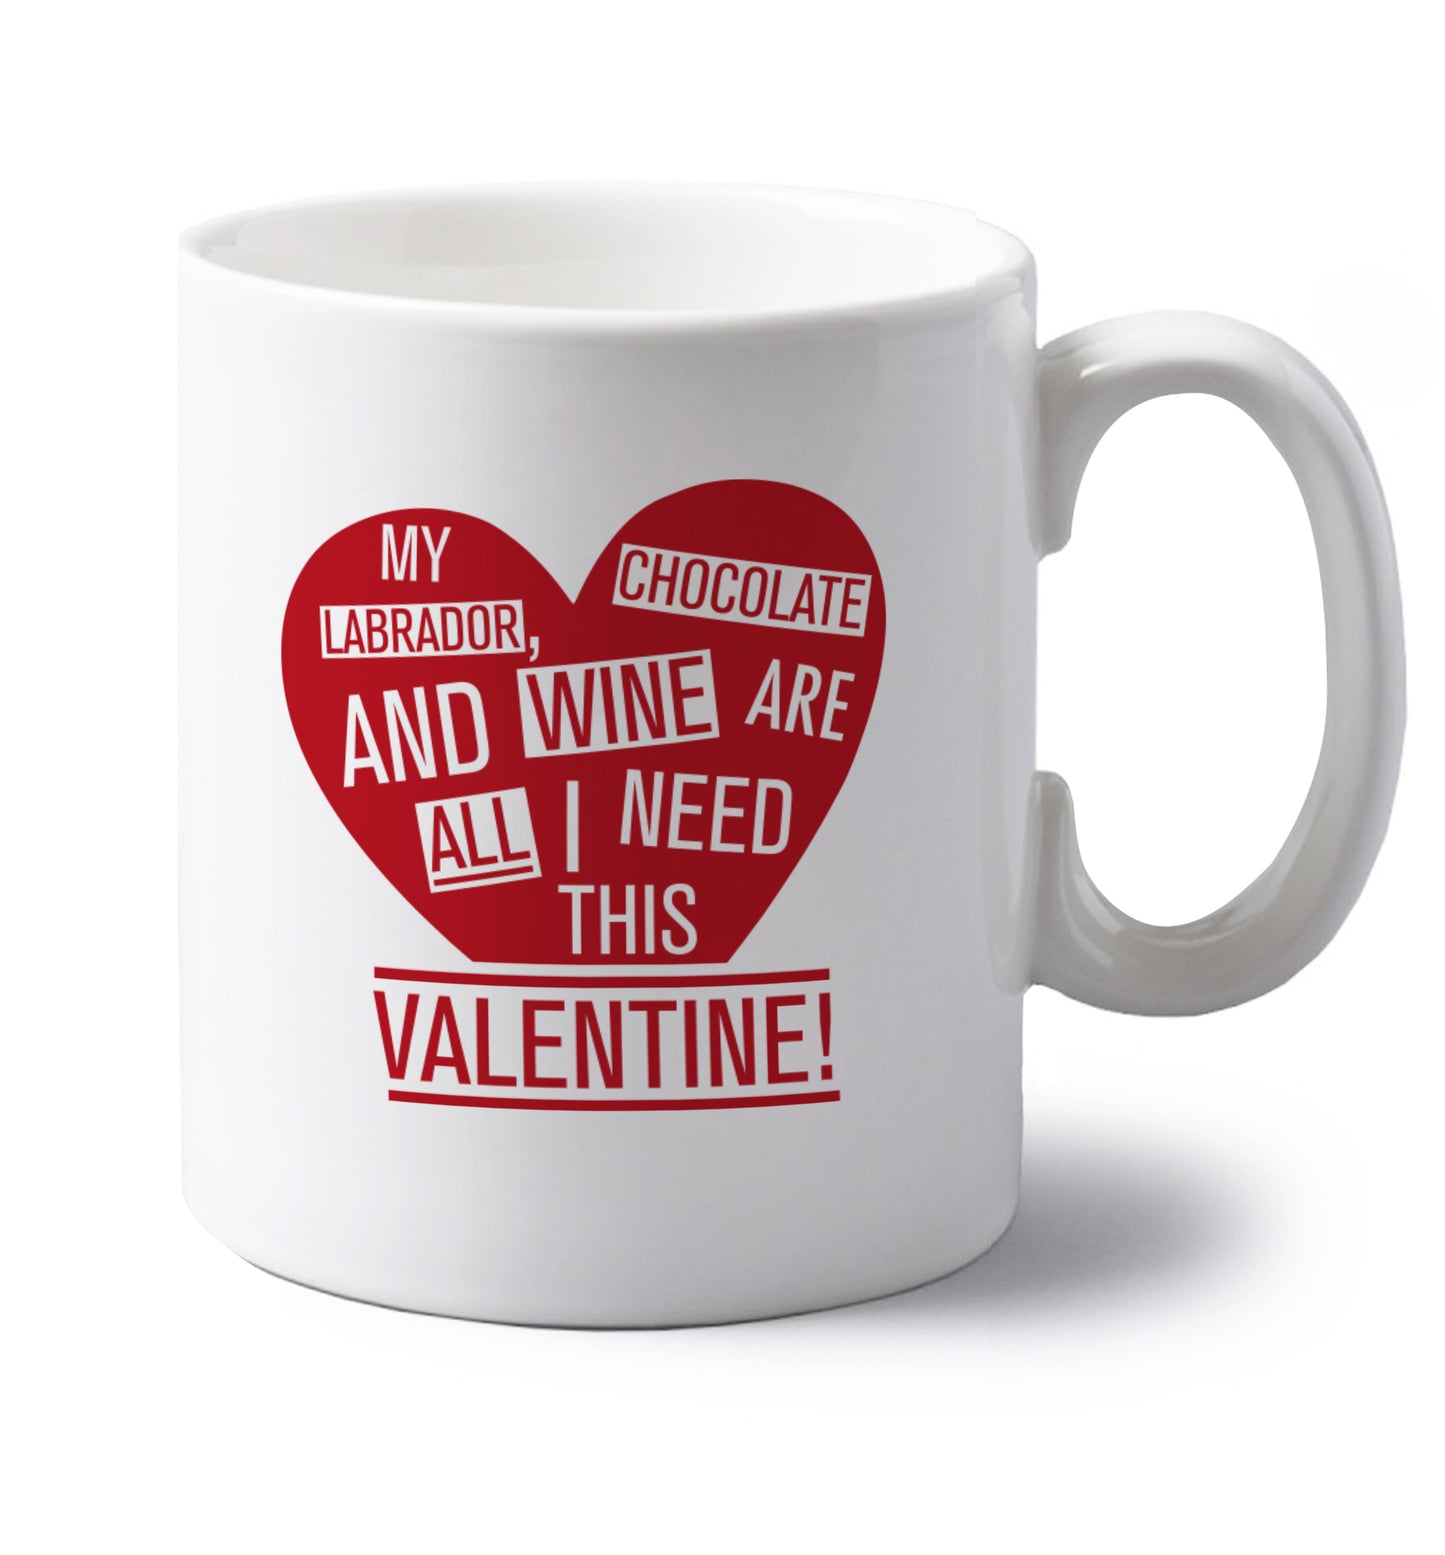 My labrador, chocolate and wine are all I need this valentine! left handed white ceramic mug 